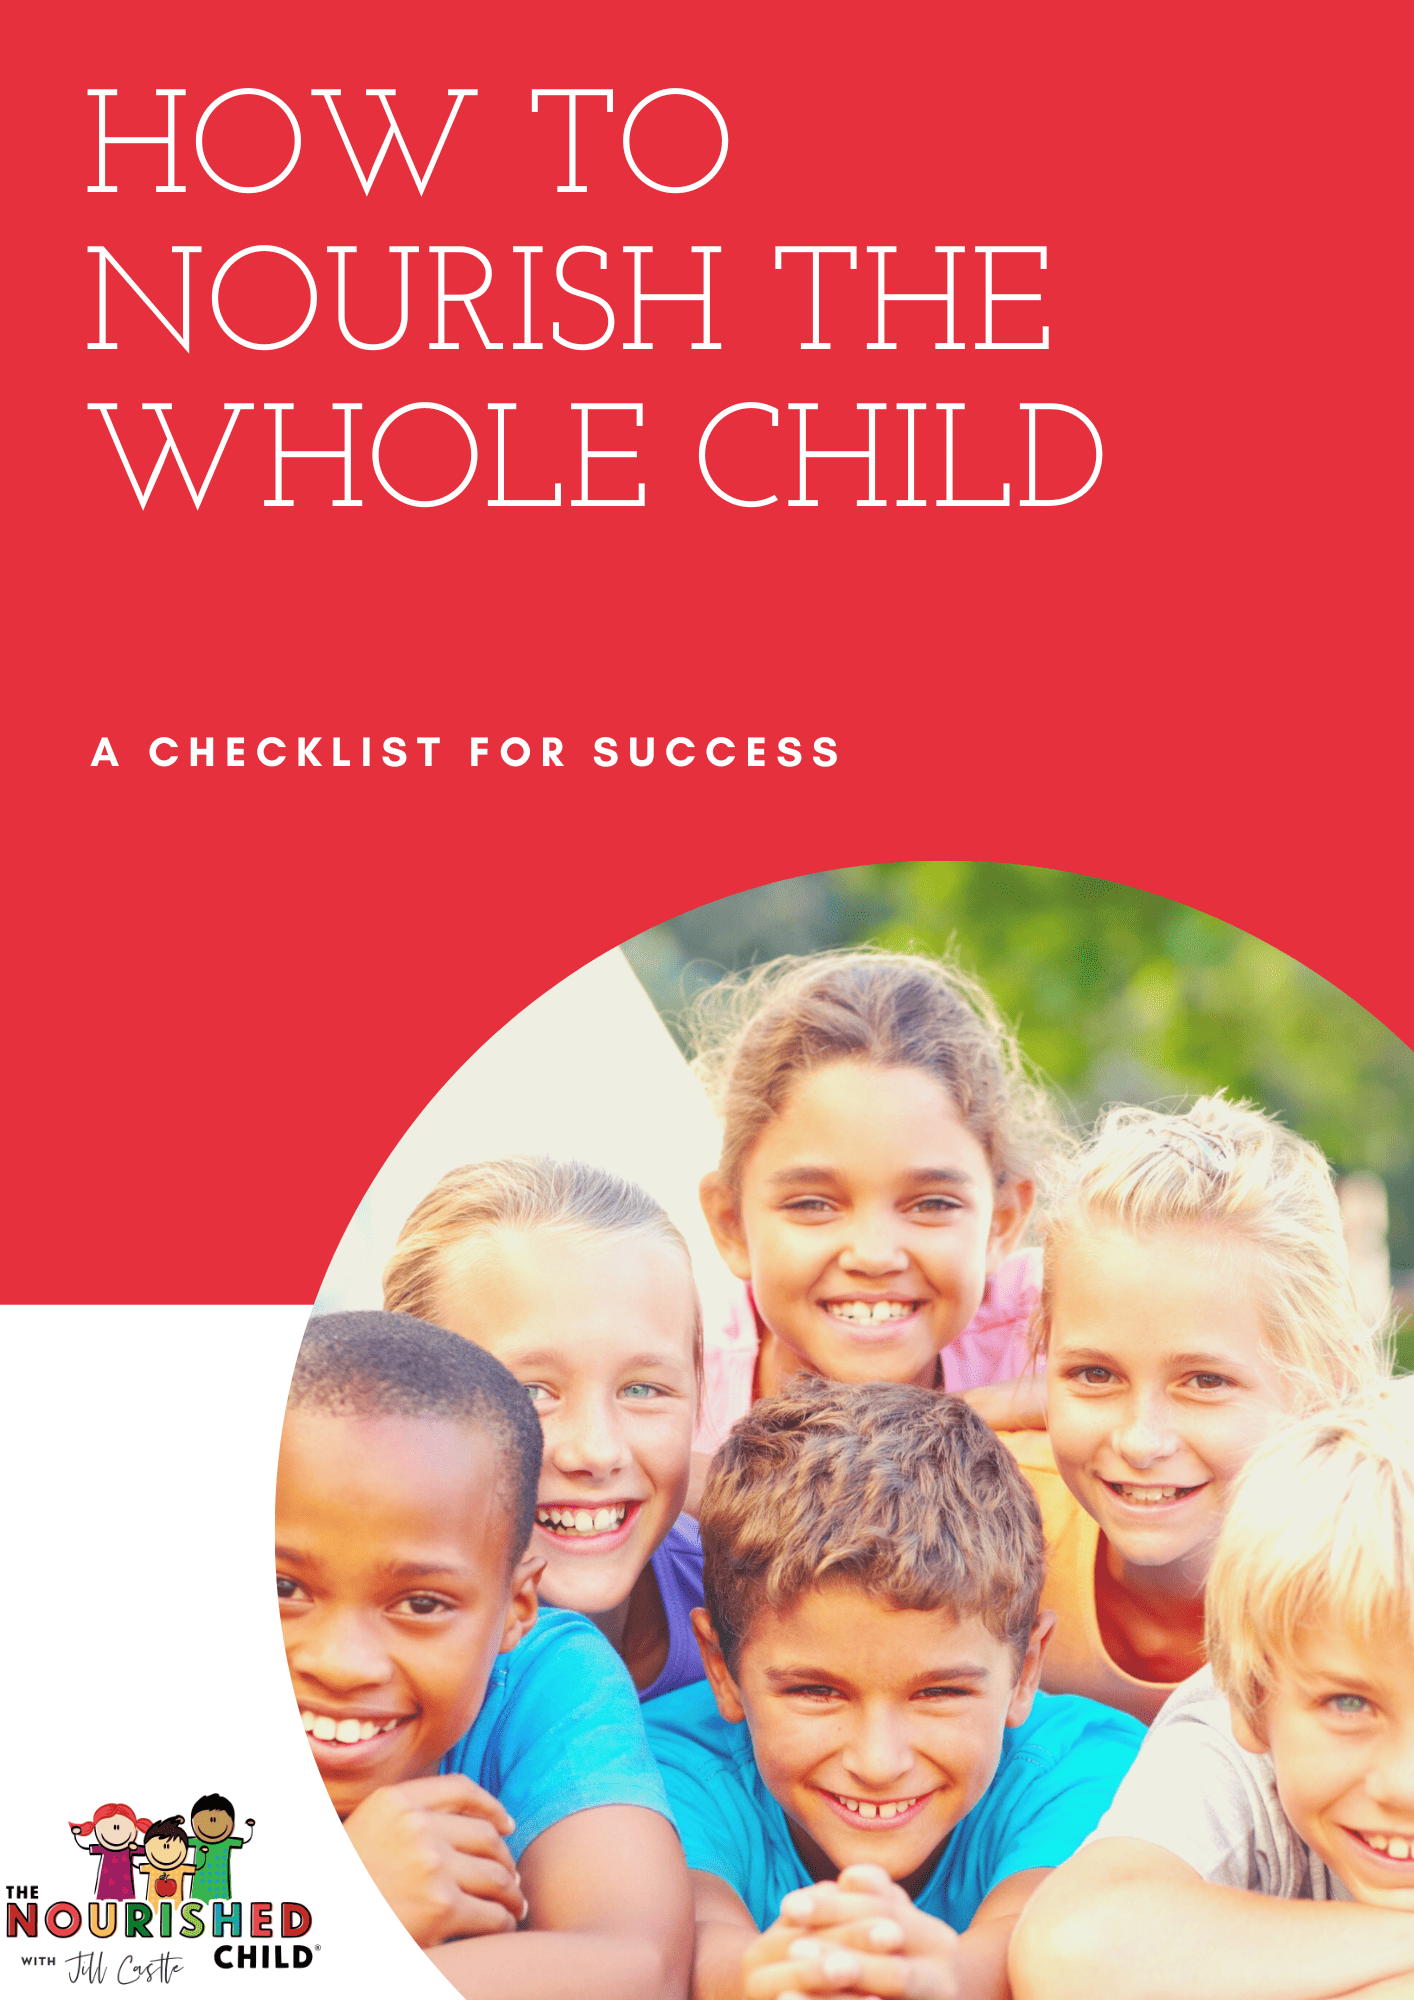 Nourish the Whole Child guide for parents and caretakers